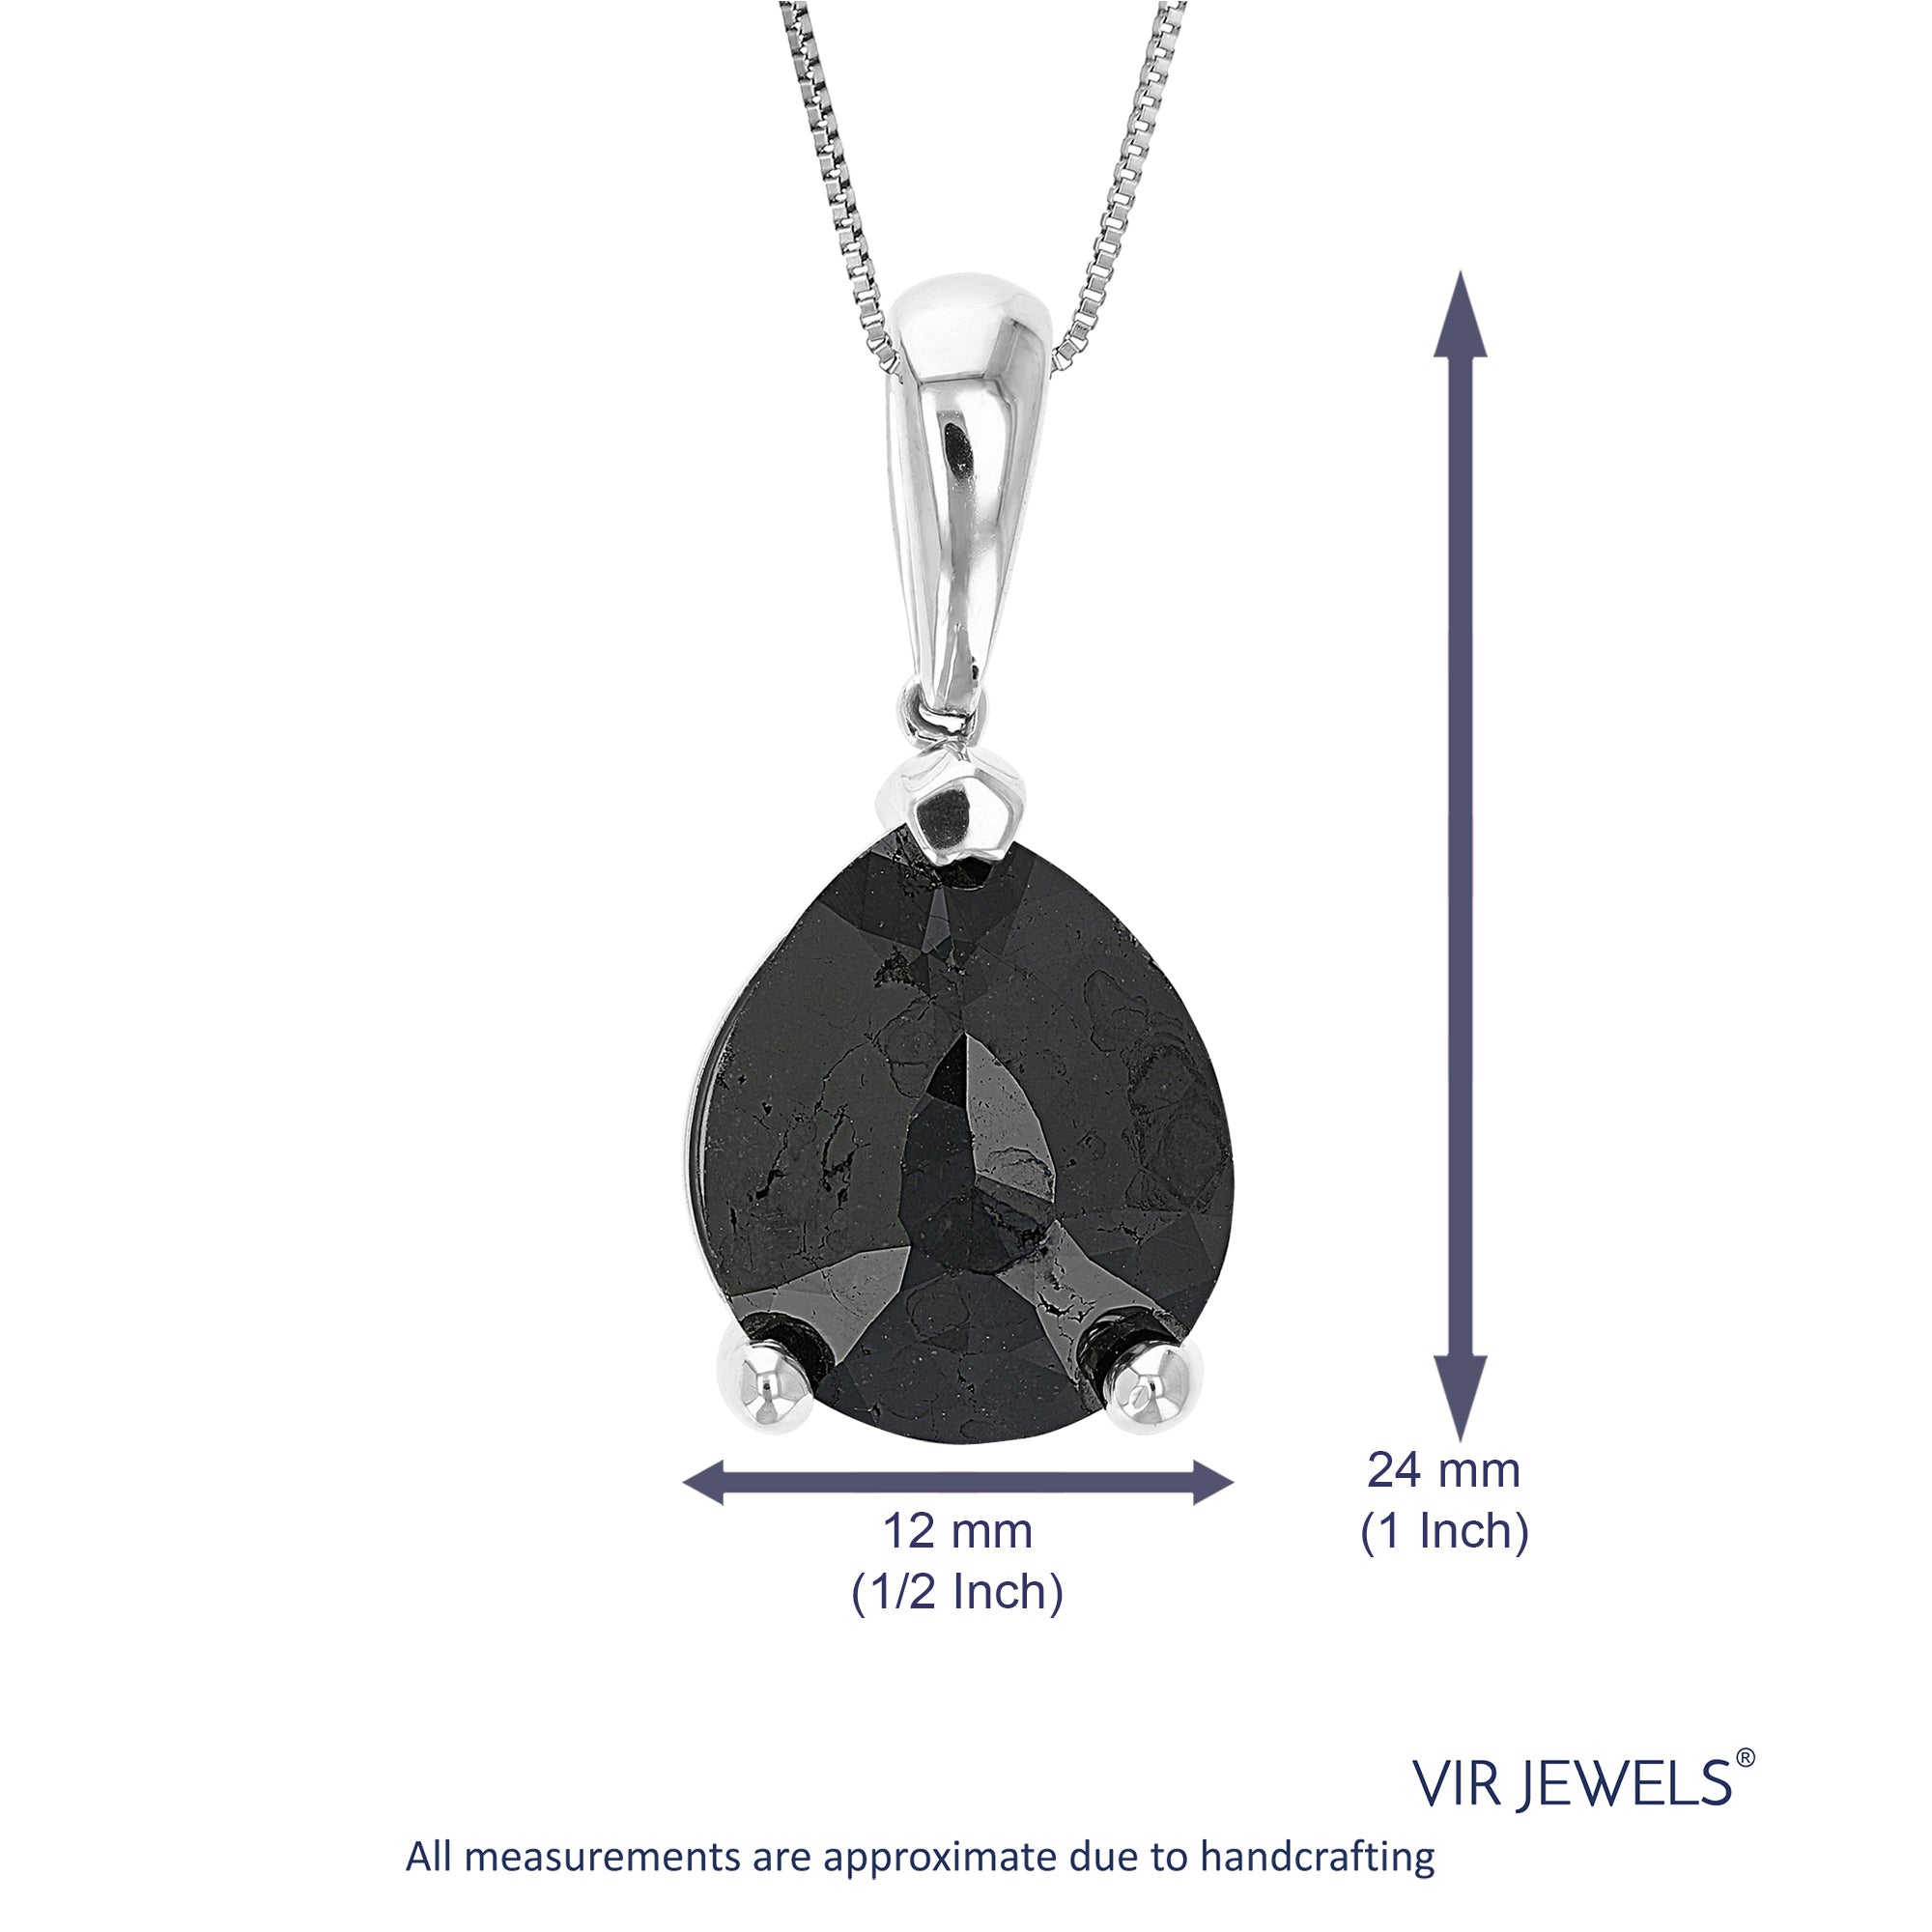 3 cttw Diamond Pendant, Black Diamond Pear Shape Pendant Necklace for Women in .925 Sterling Silver with 18 Inch Chain, Prong Setting